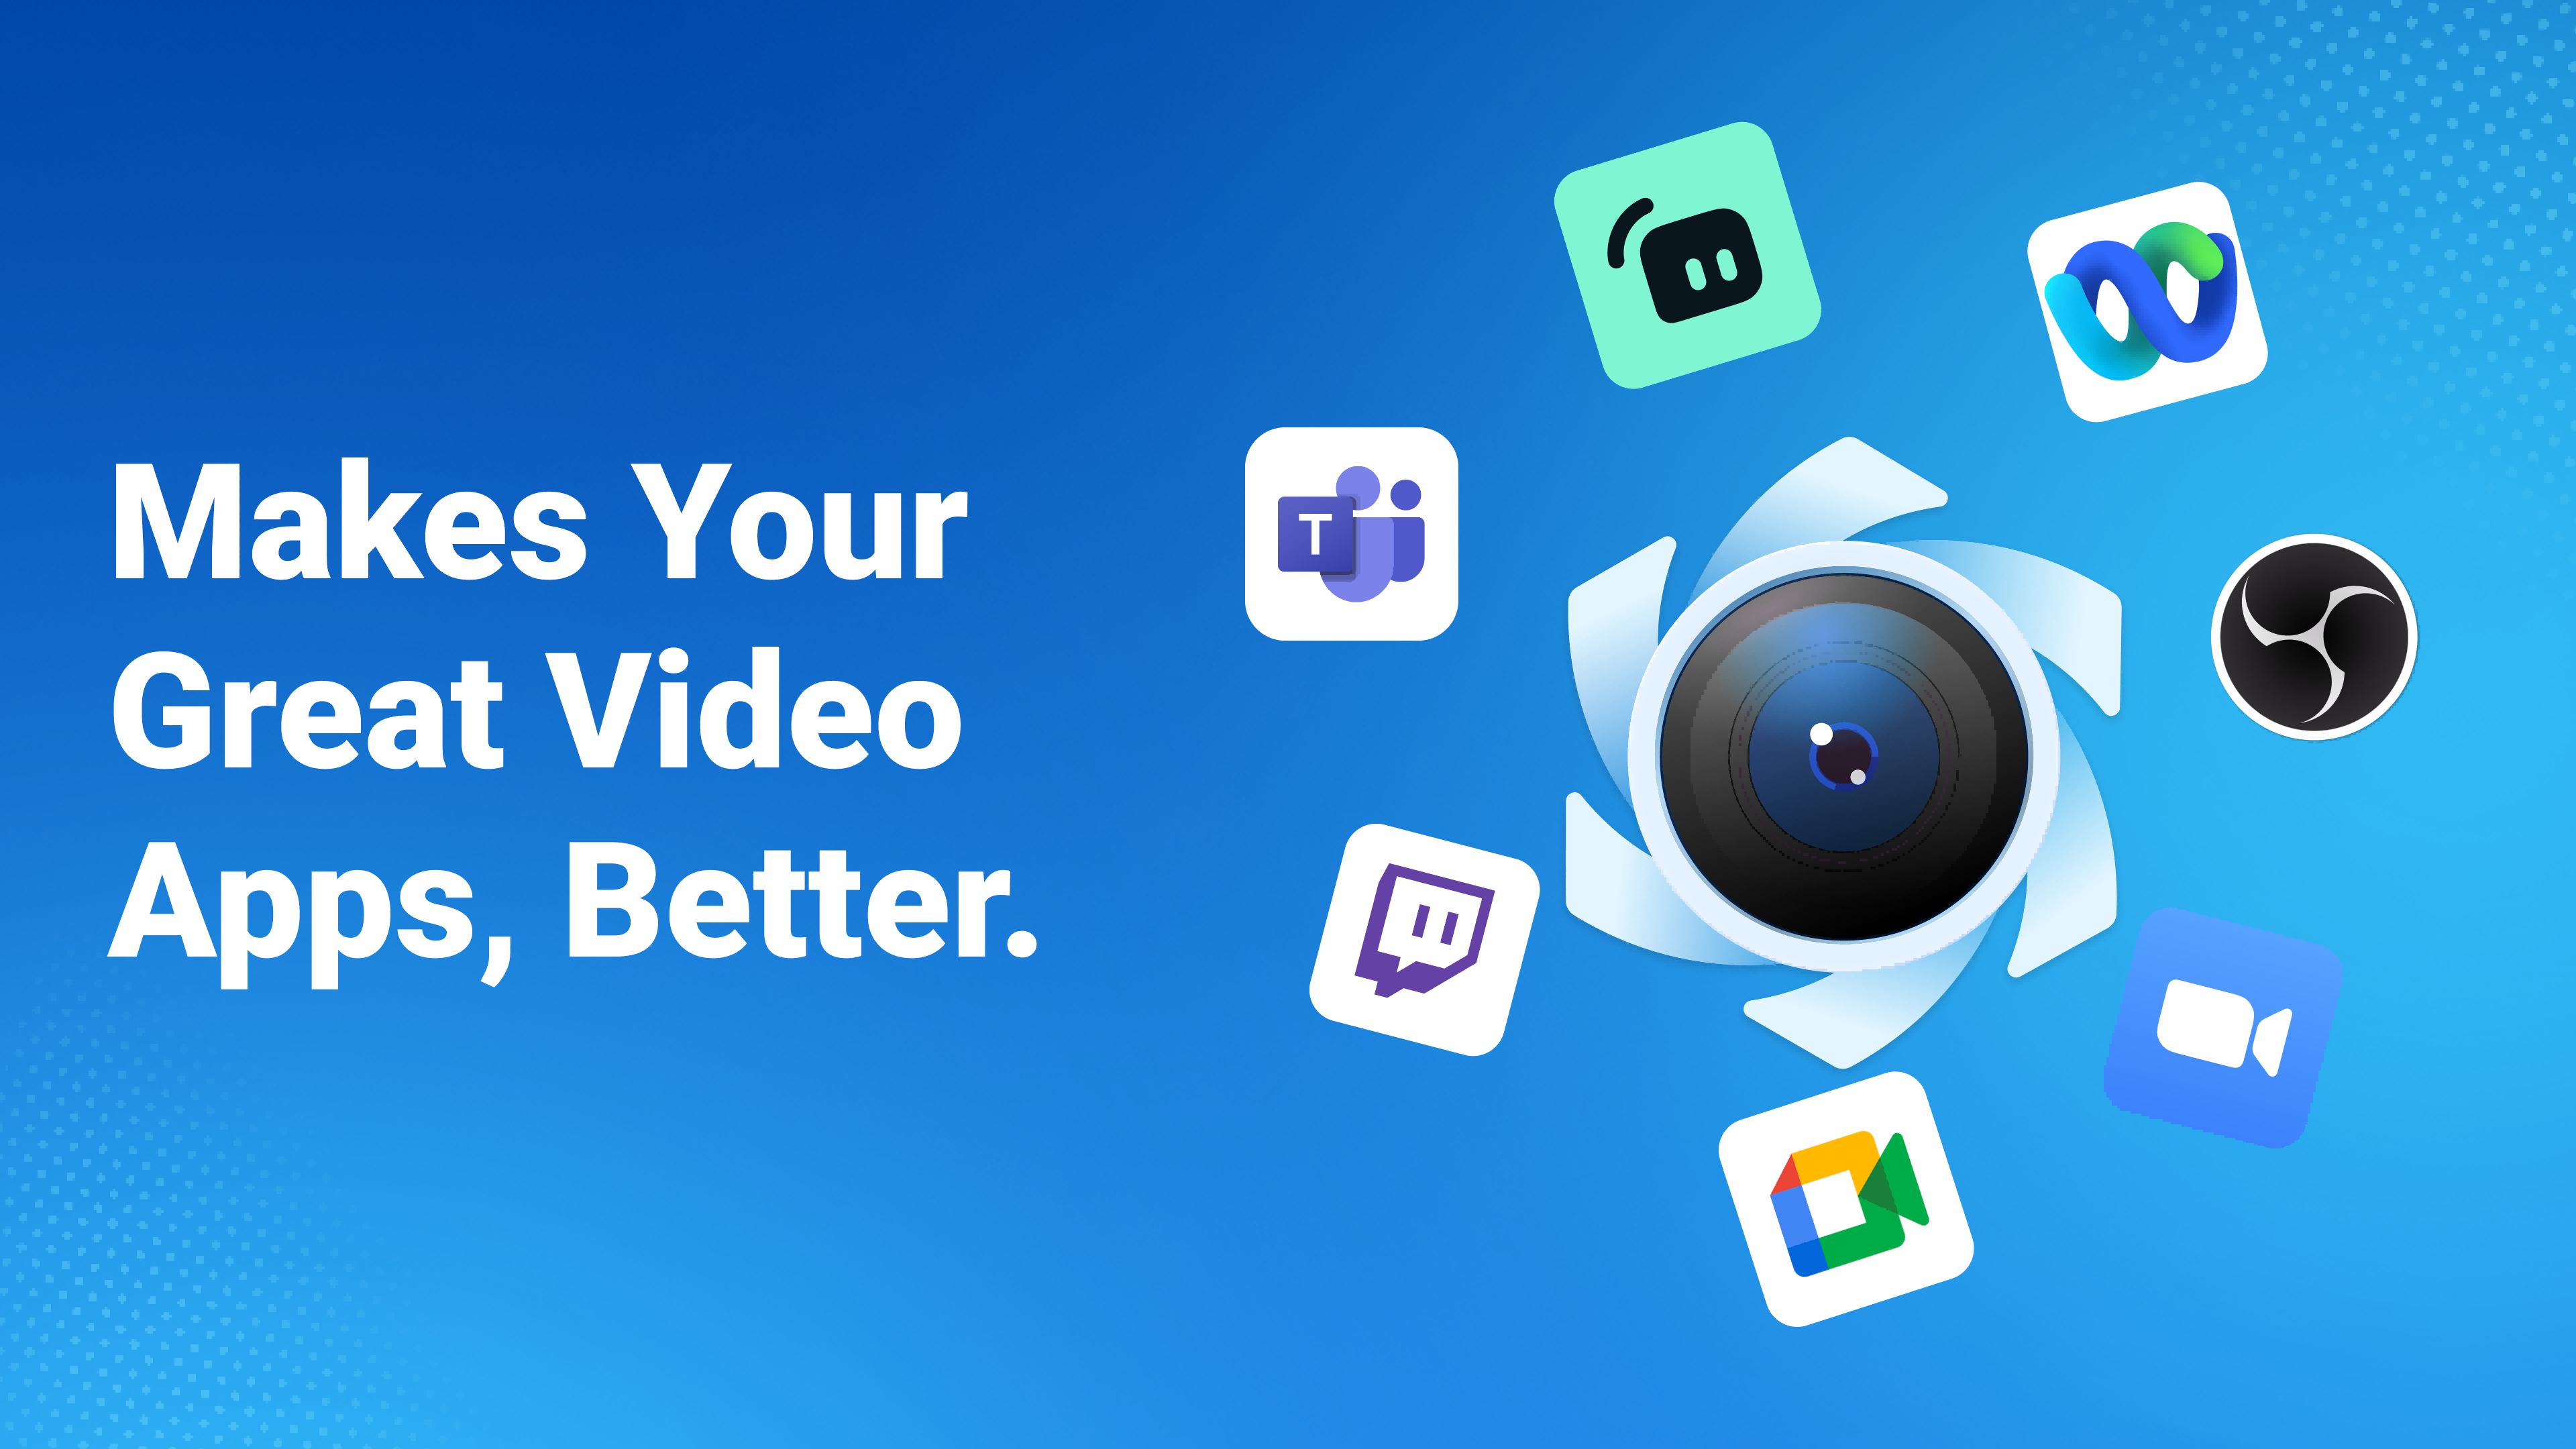 FineCam - Makes Your Great Video Apps